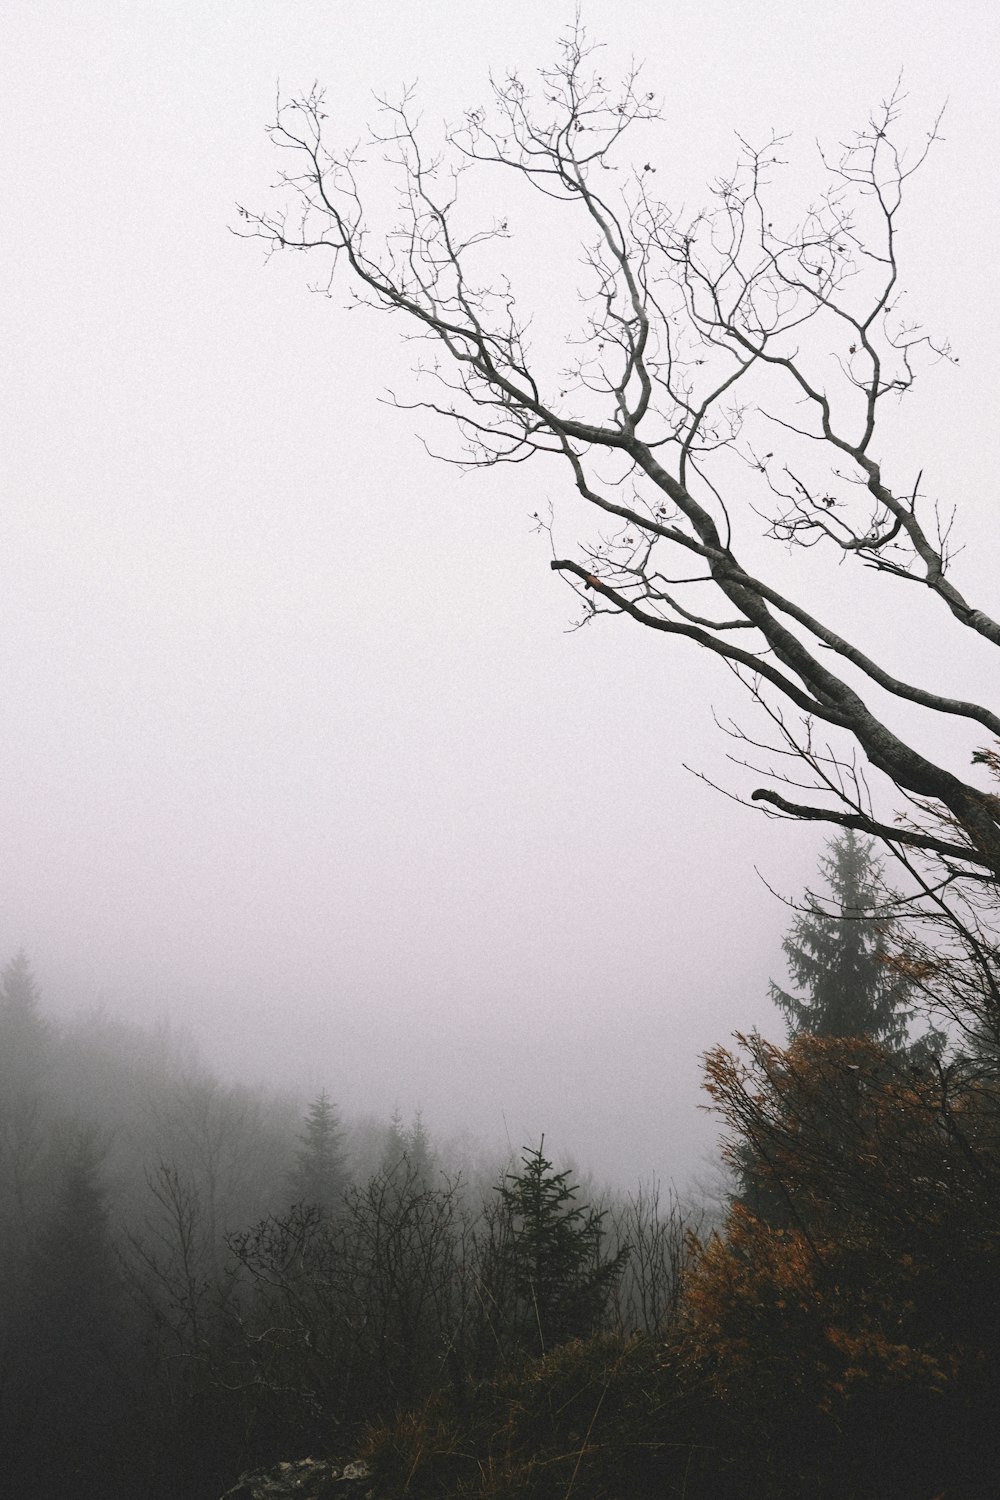 bare tree by trees during foggy weather